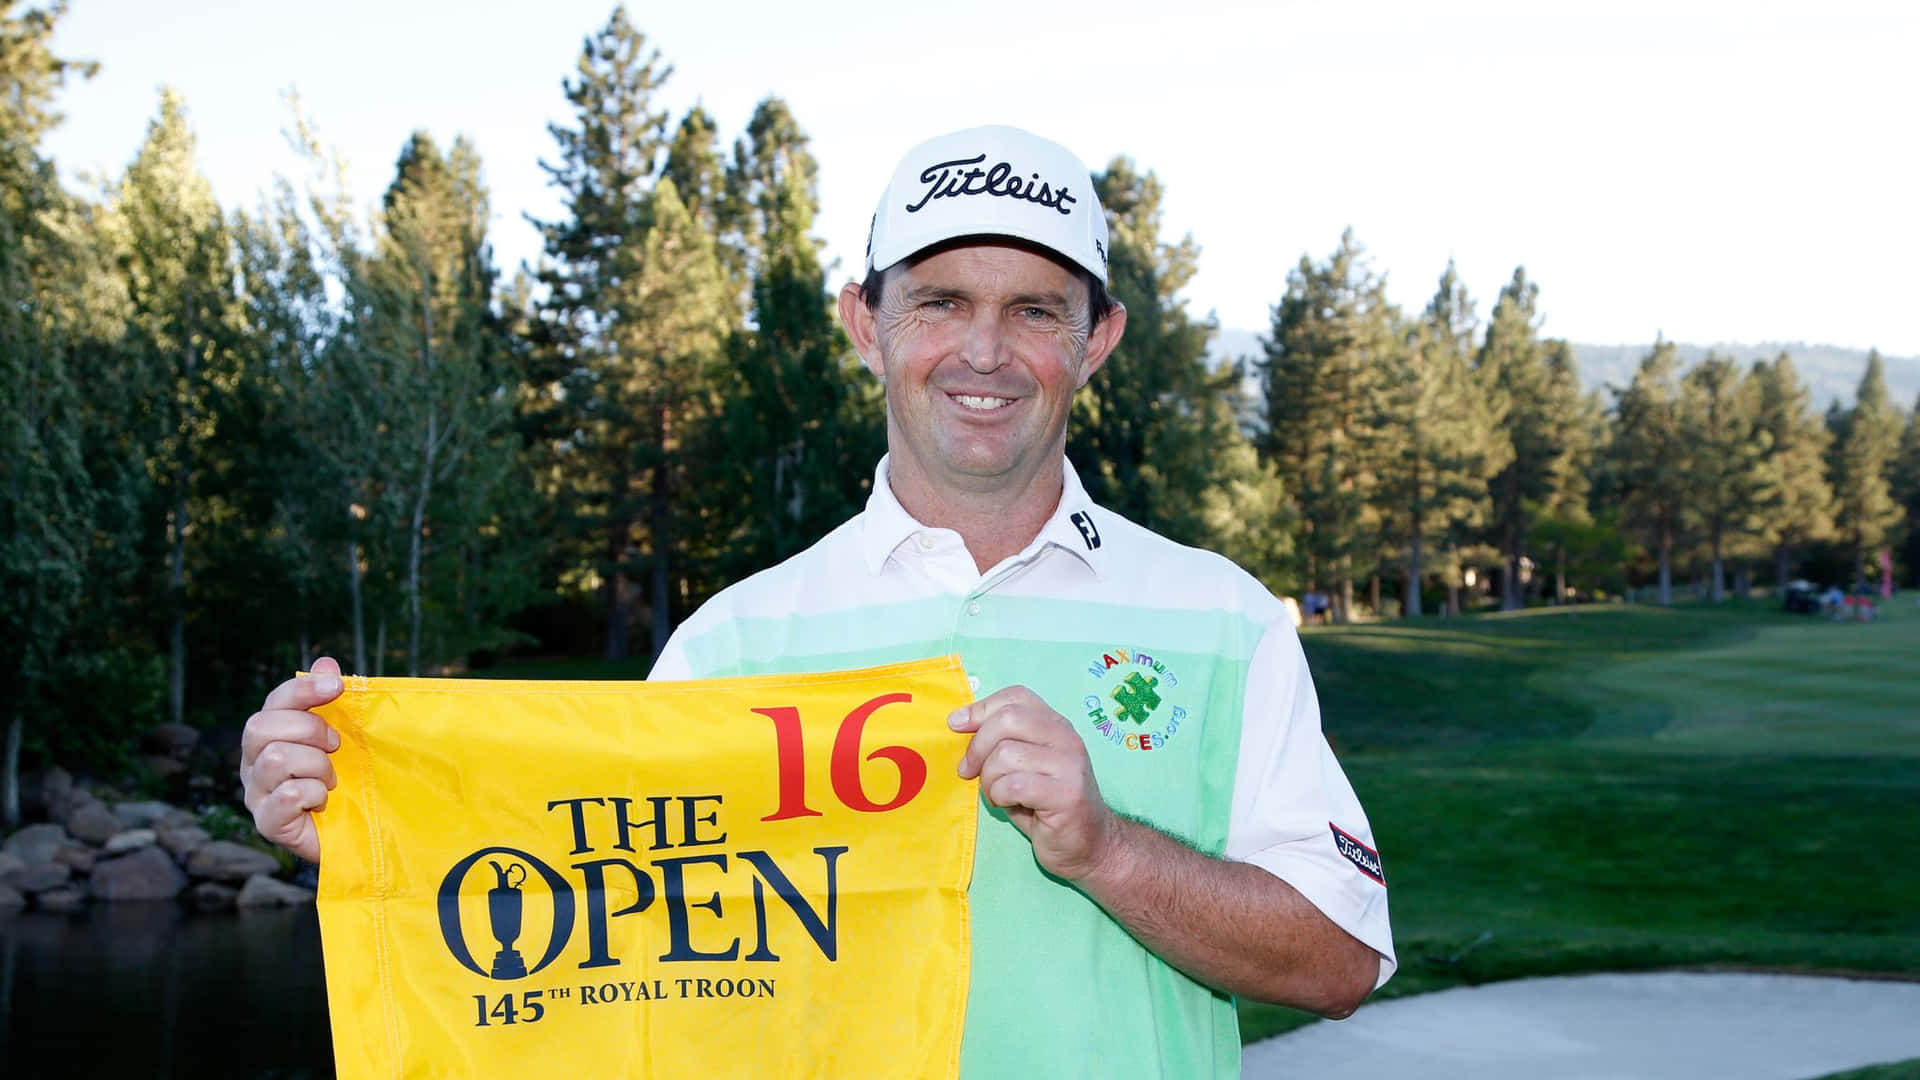 Caption: Professional Golfer Greg Chalmers Holding a Yellow Banner Wallpaper